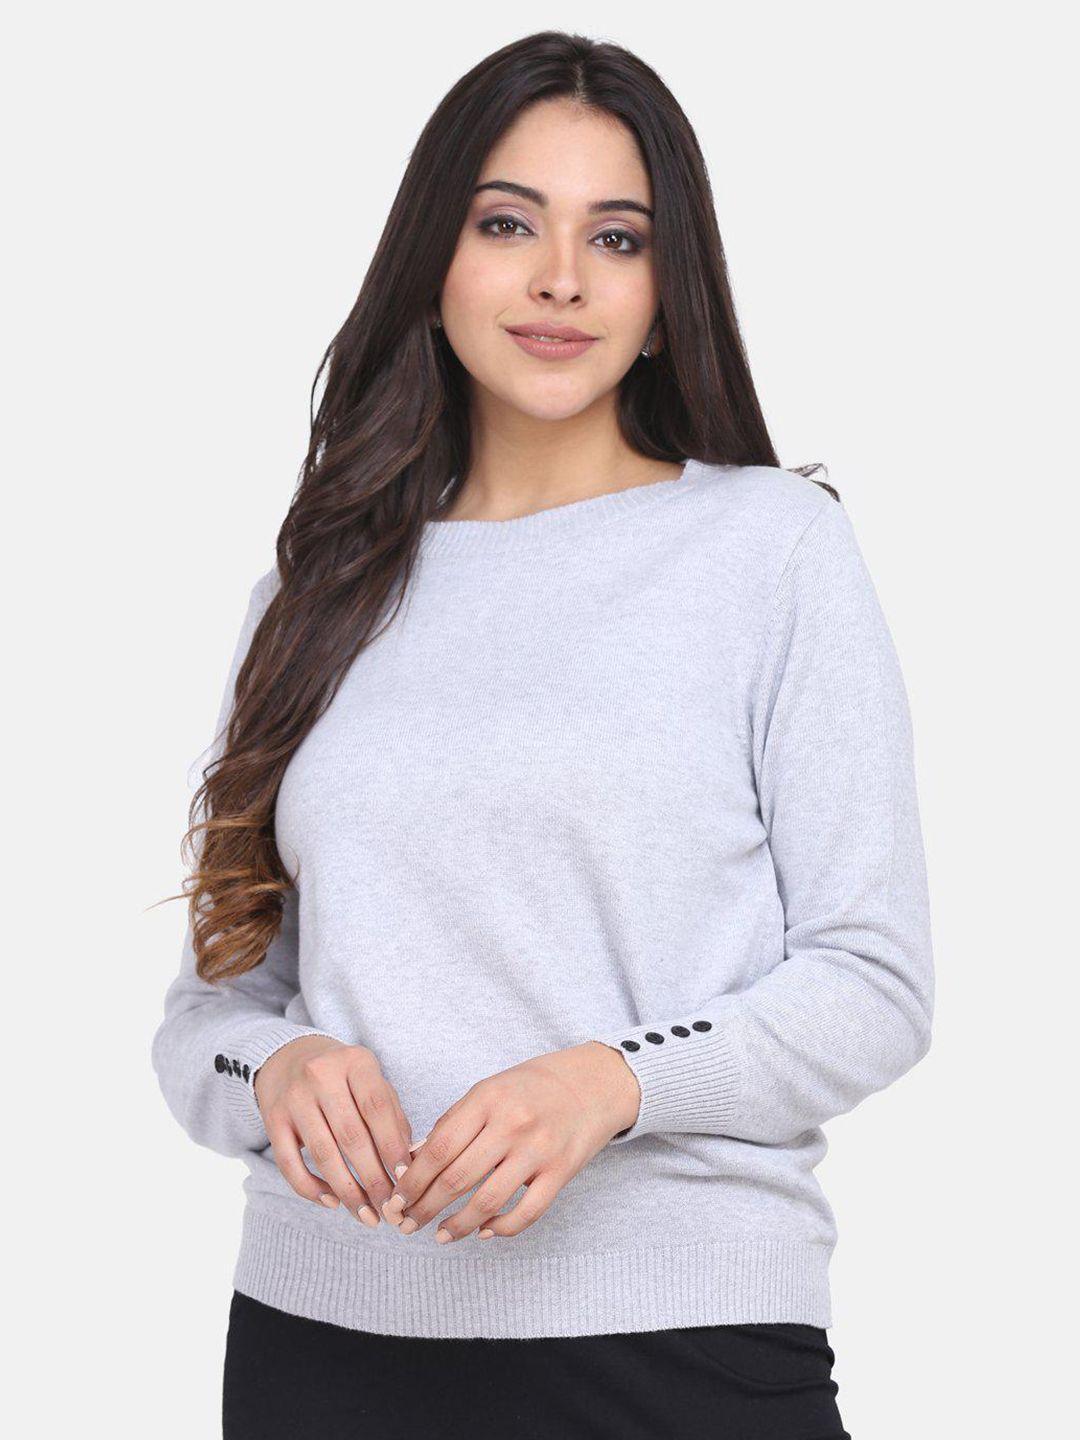 powersutra-women-grey-solid-pullover